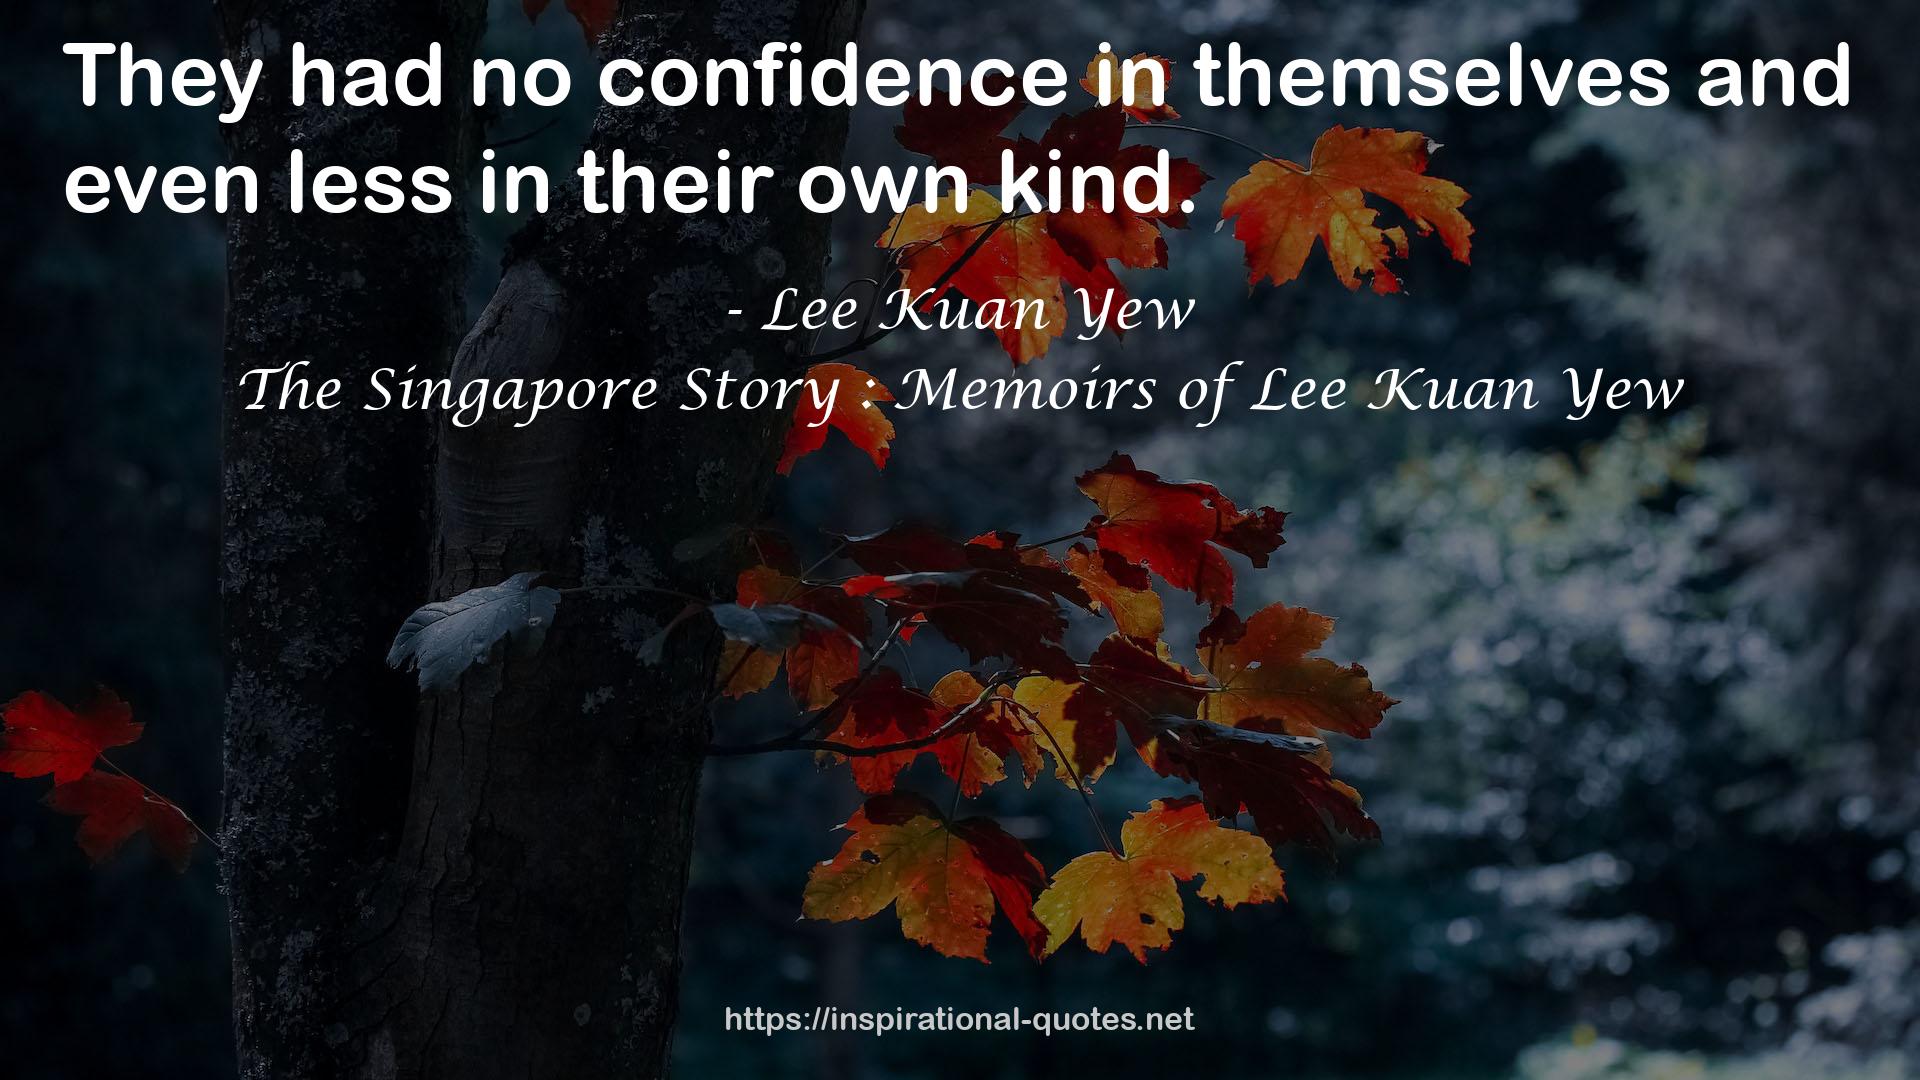 The Singapore Story : Memoirs of Lee Kuan Yew QUOTES